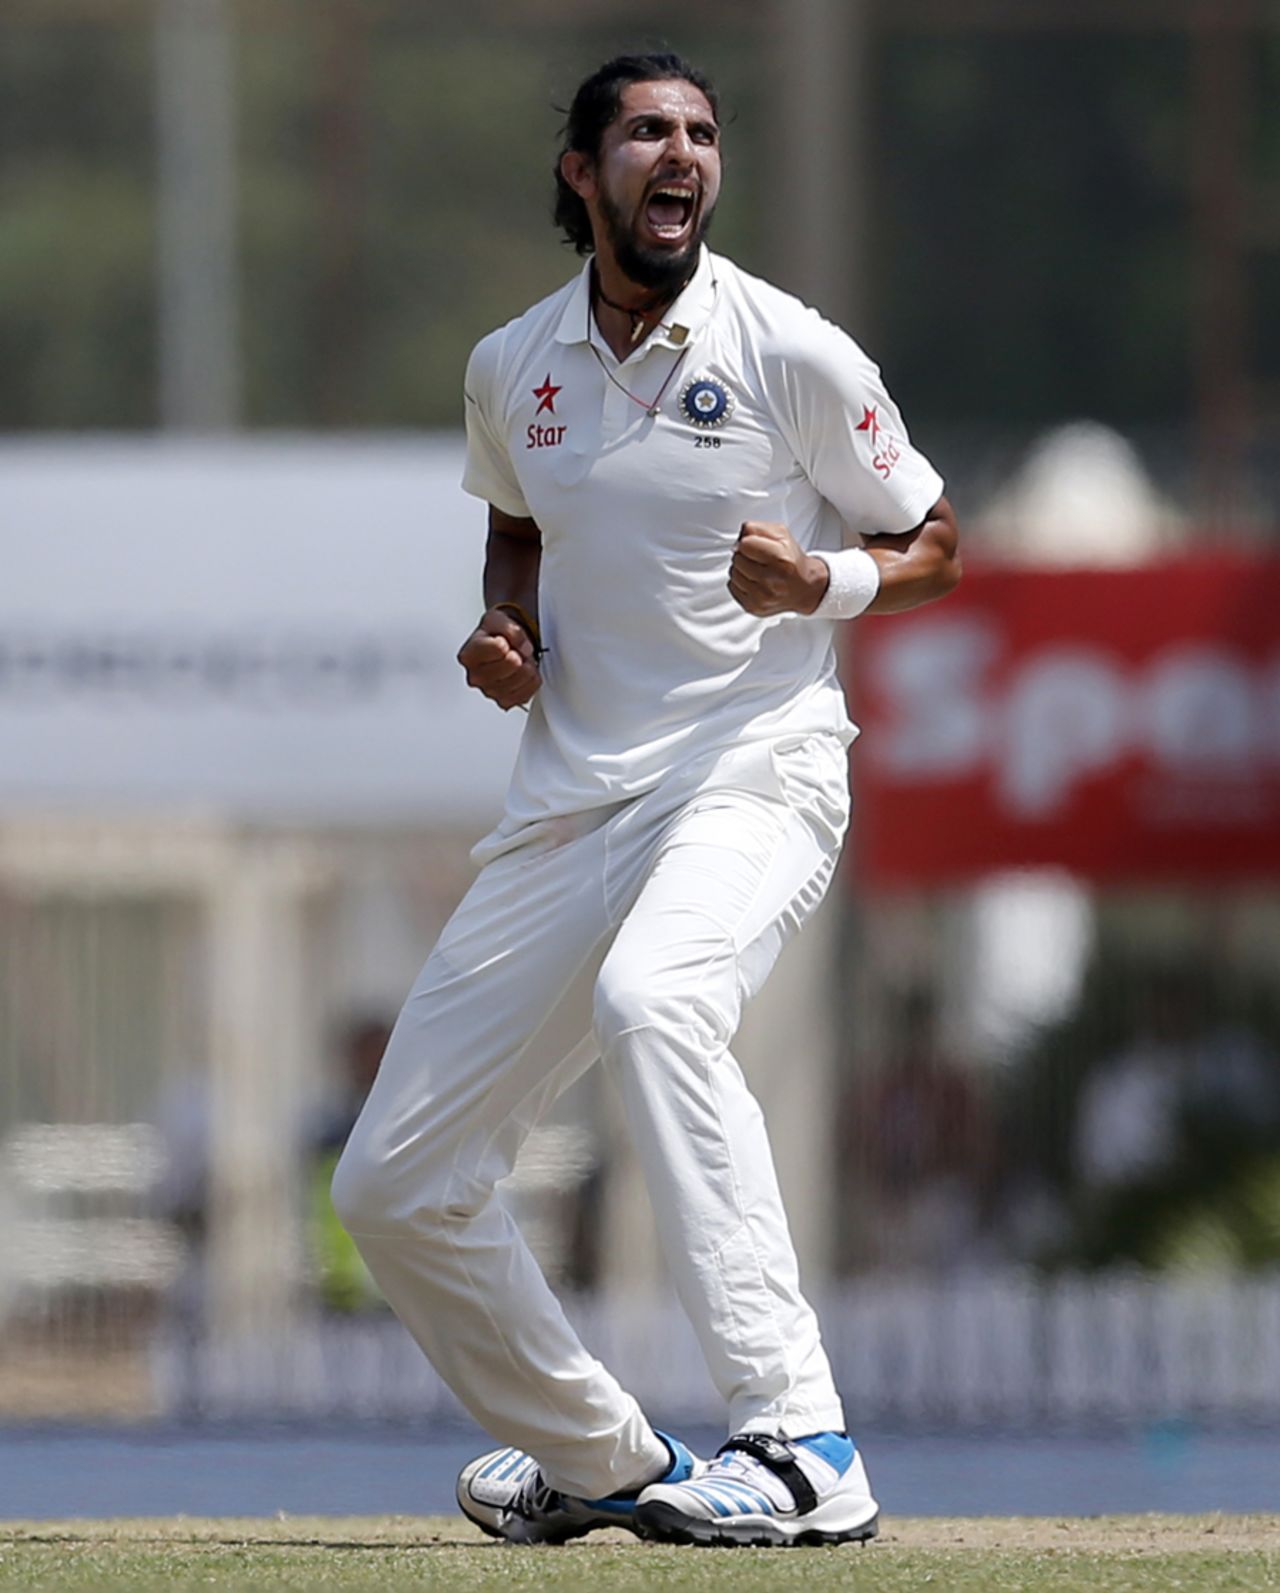 Ishant Sharma exults after taking a wicket, India v Australia, 3rd Test, Ranchi, 5th day, March 20, 2017